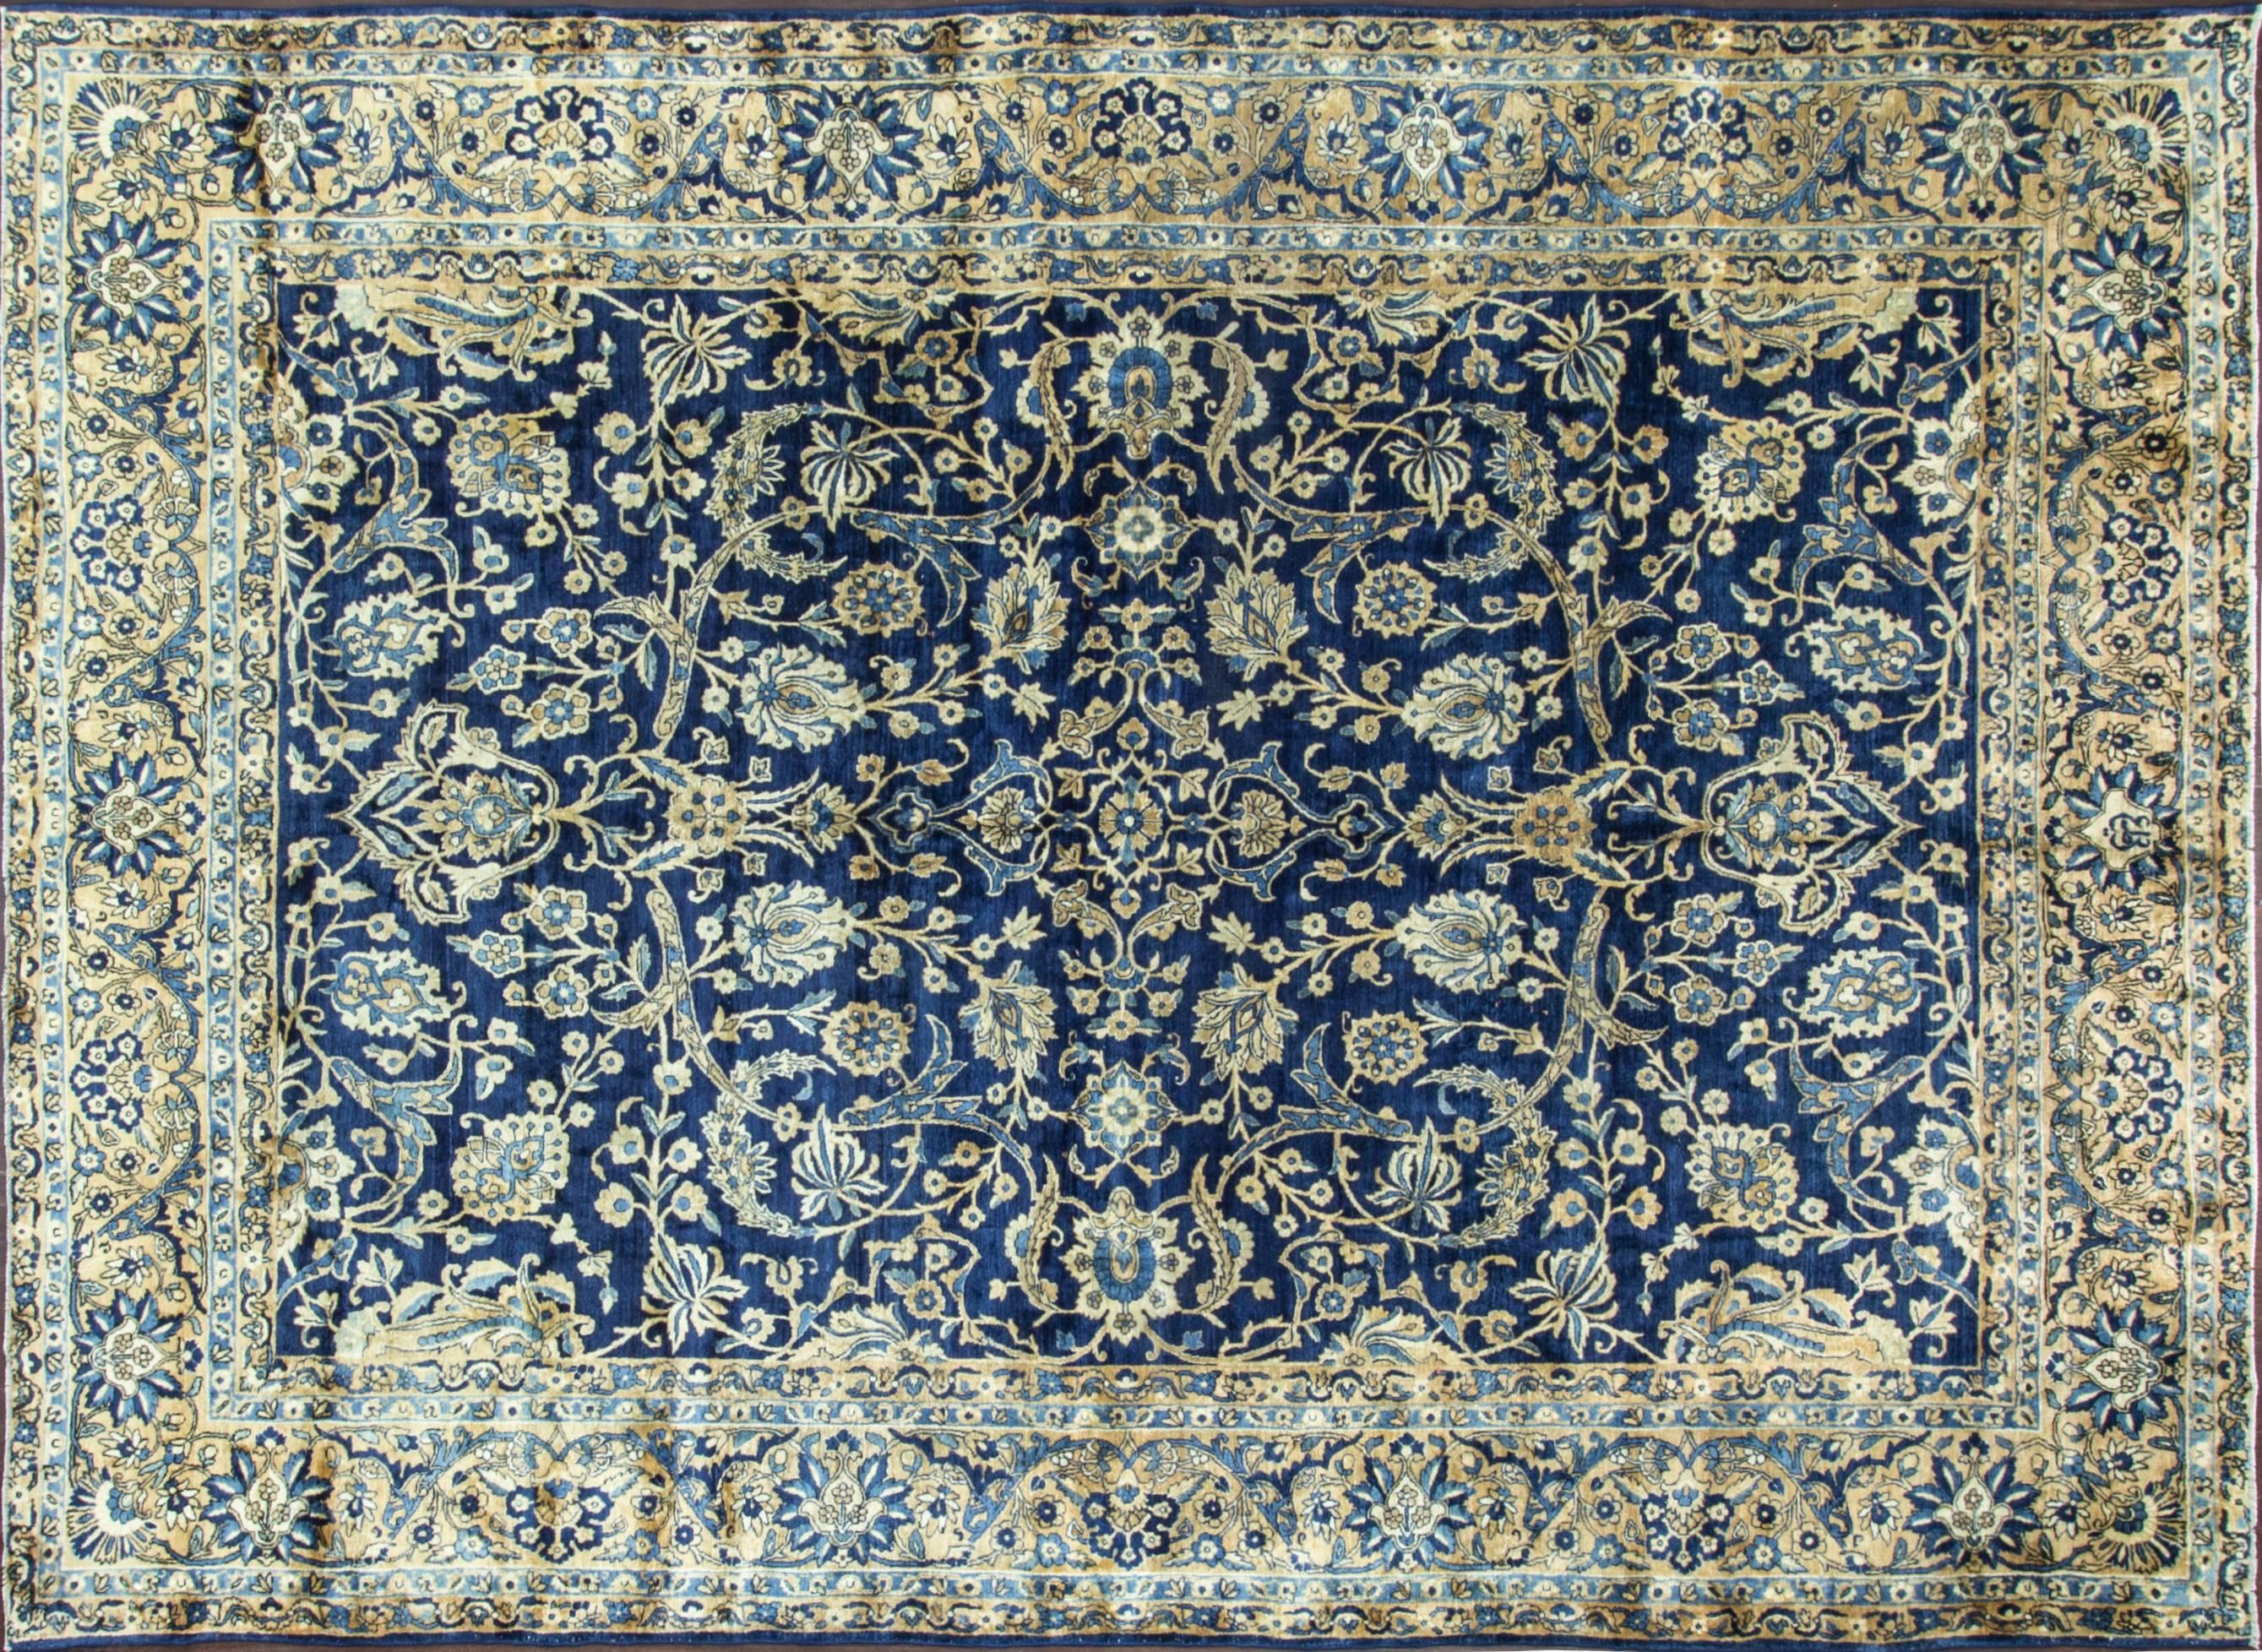 Fine traditional, circa 1920 Persian Laver Kerman.
Wool pile with vegetable dye.
Laver Kerman made in south east Persia, the rugs from this area are all made finely and very decorative. Measures: 8'5